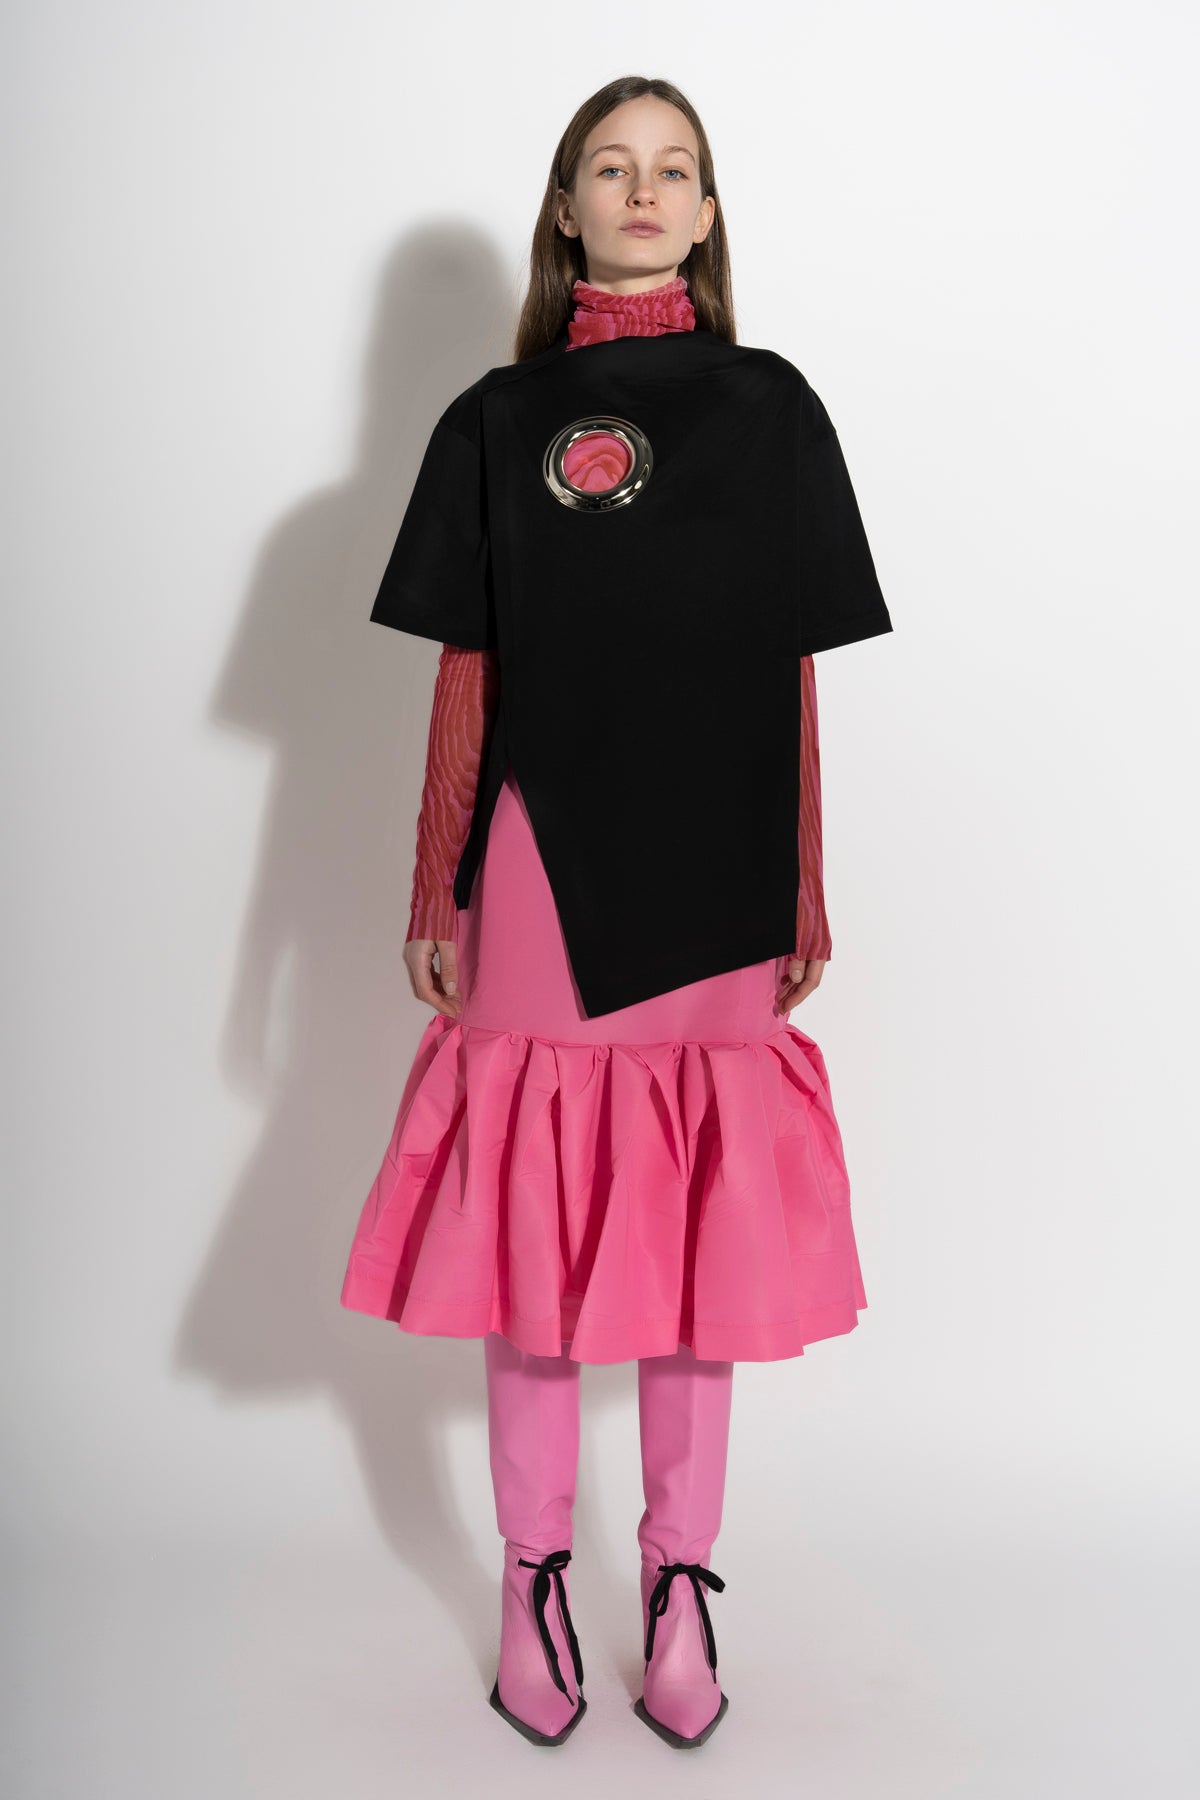 PINK FITTED SKIRT marques almeida